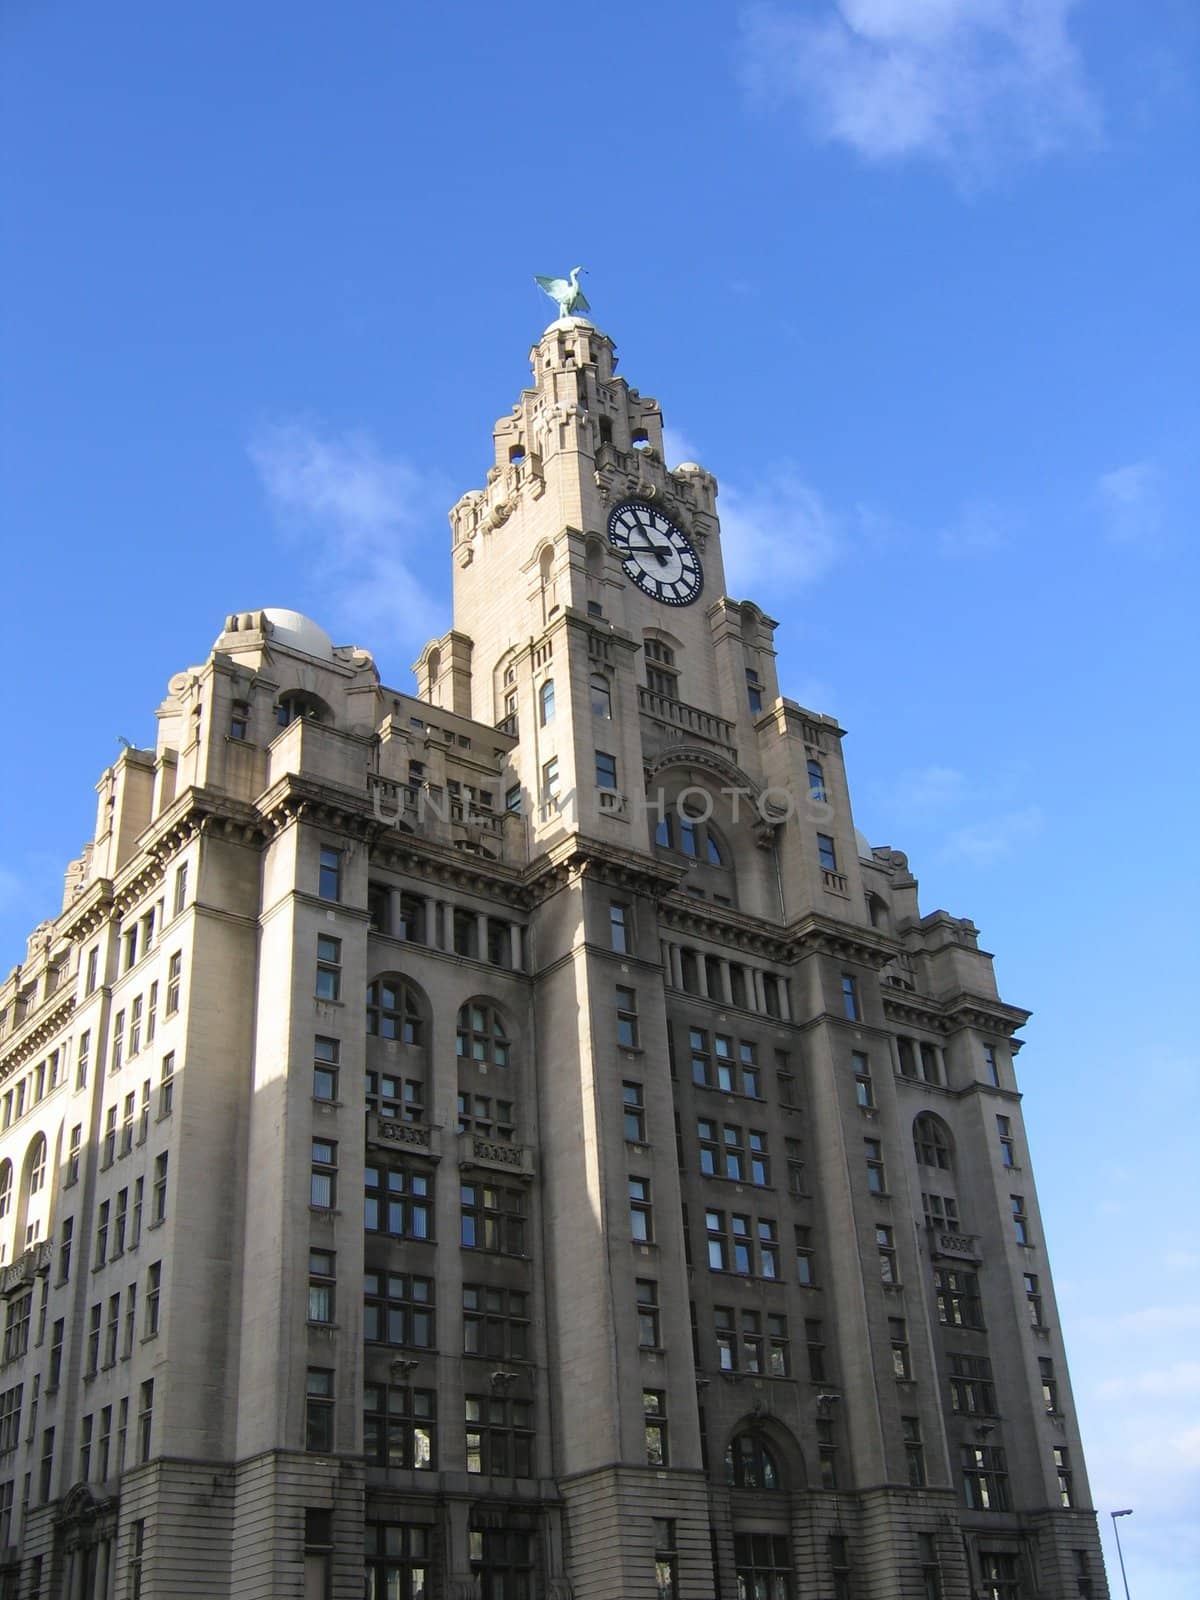 Liver Building in Liverpool England